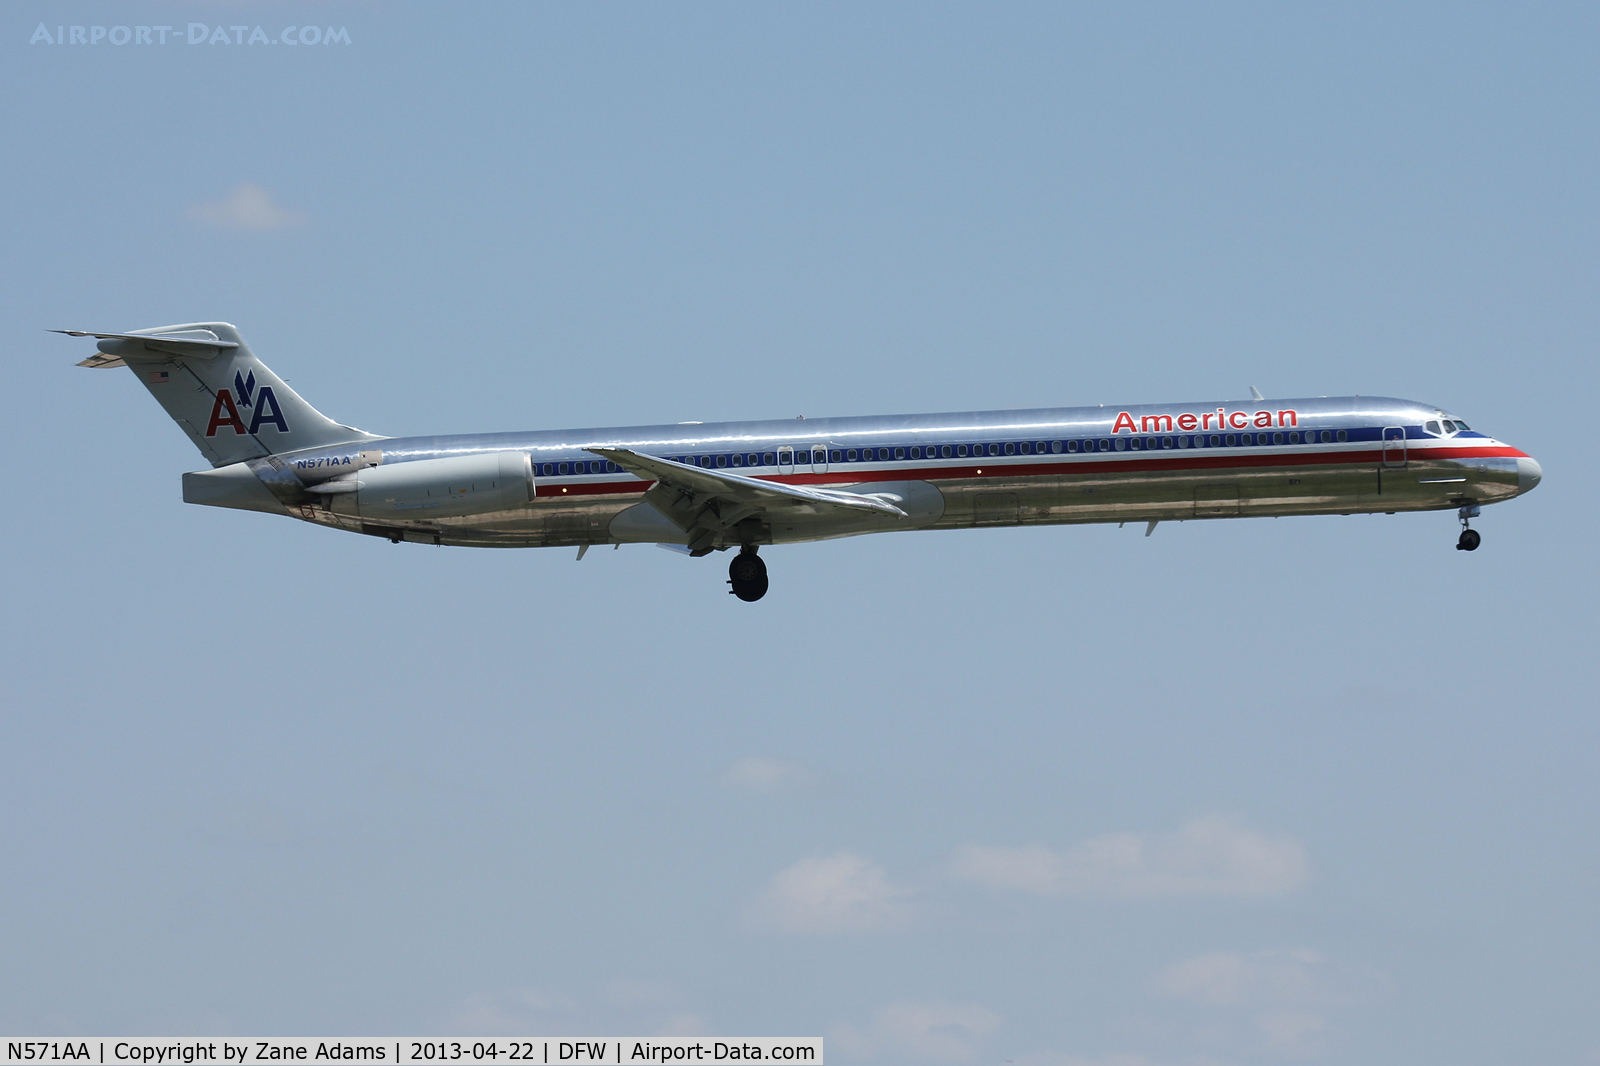 N571AA, 1987 McDonnell Douglas MD-83 (DC-9-83) C/N 49353, American Airlines at DFW Airport